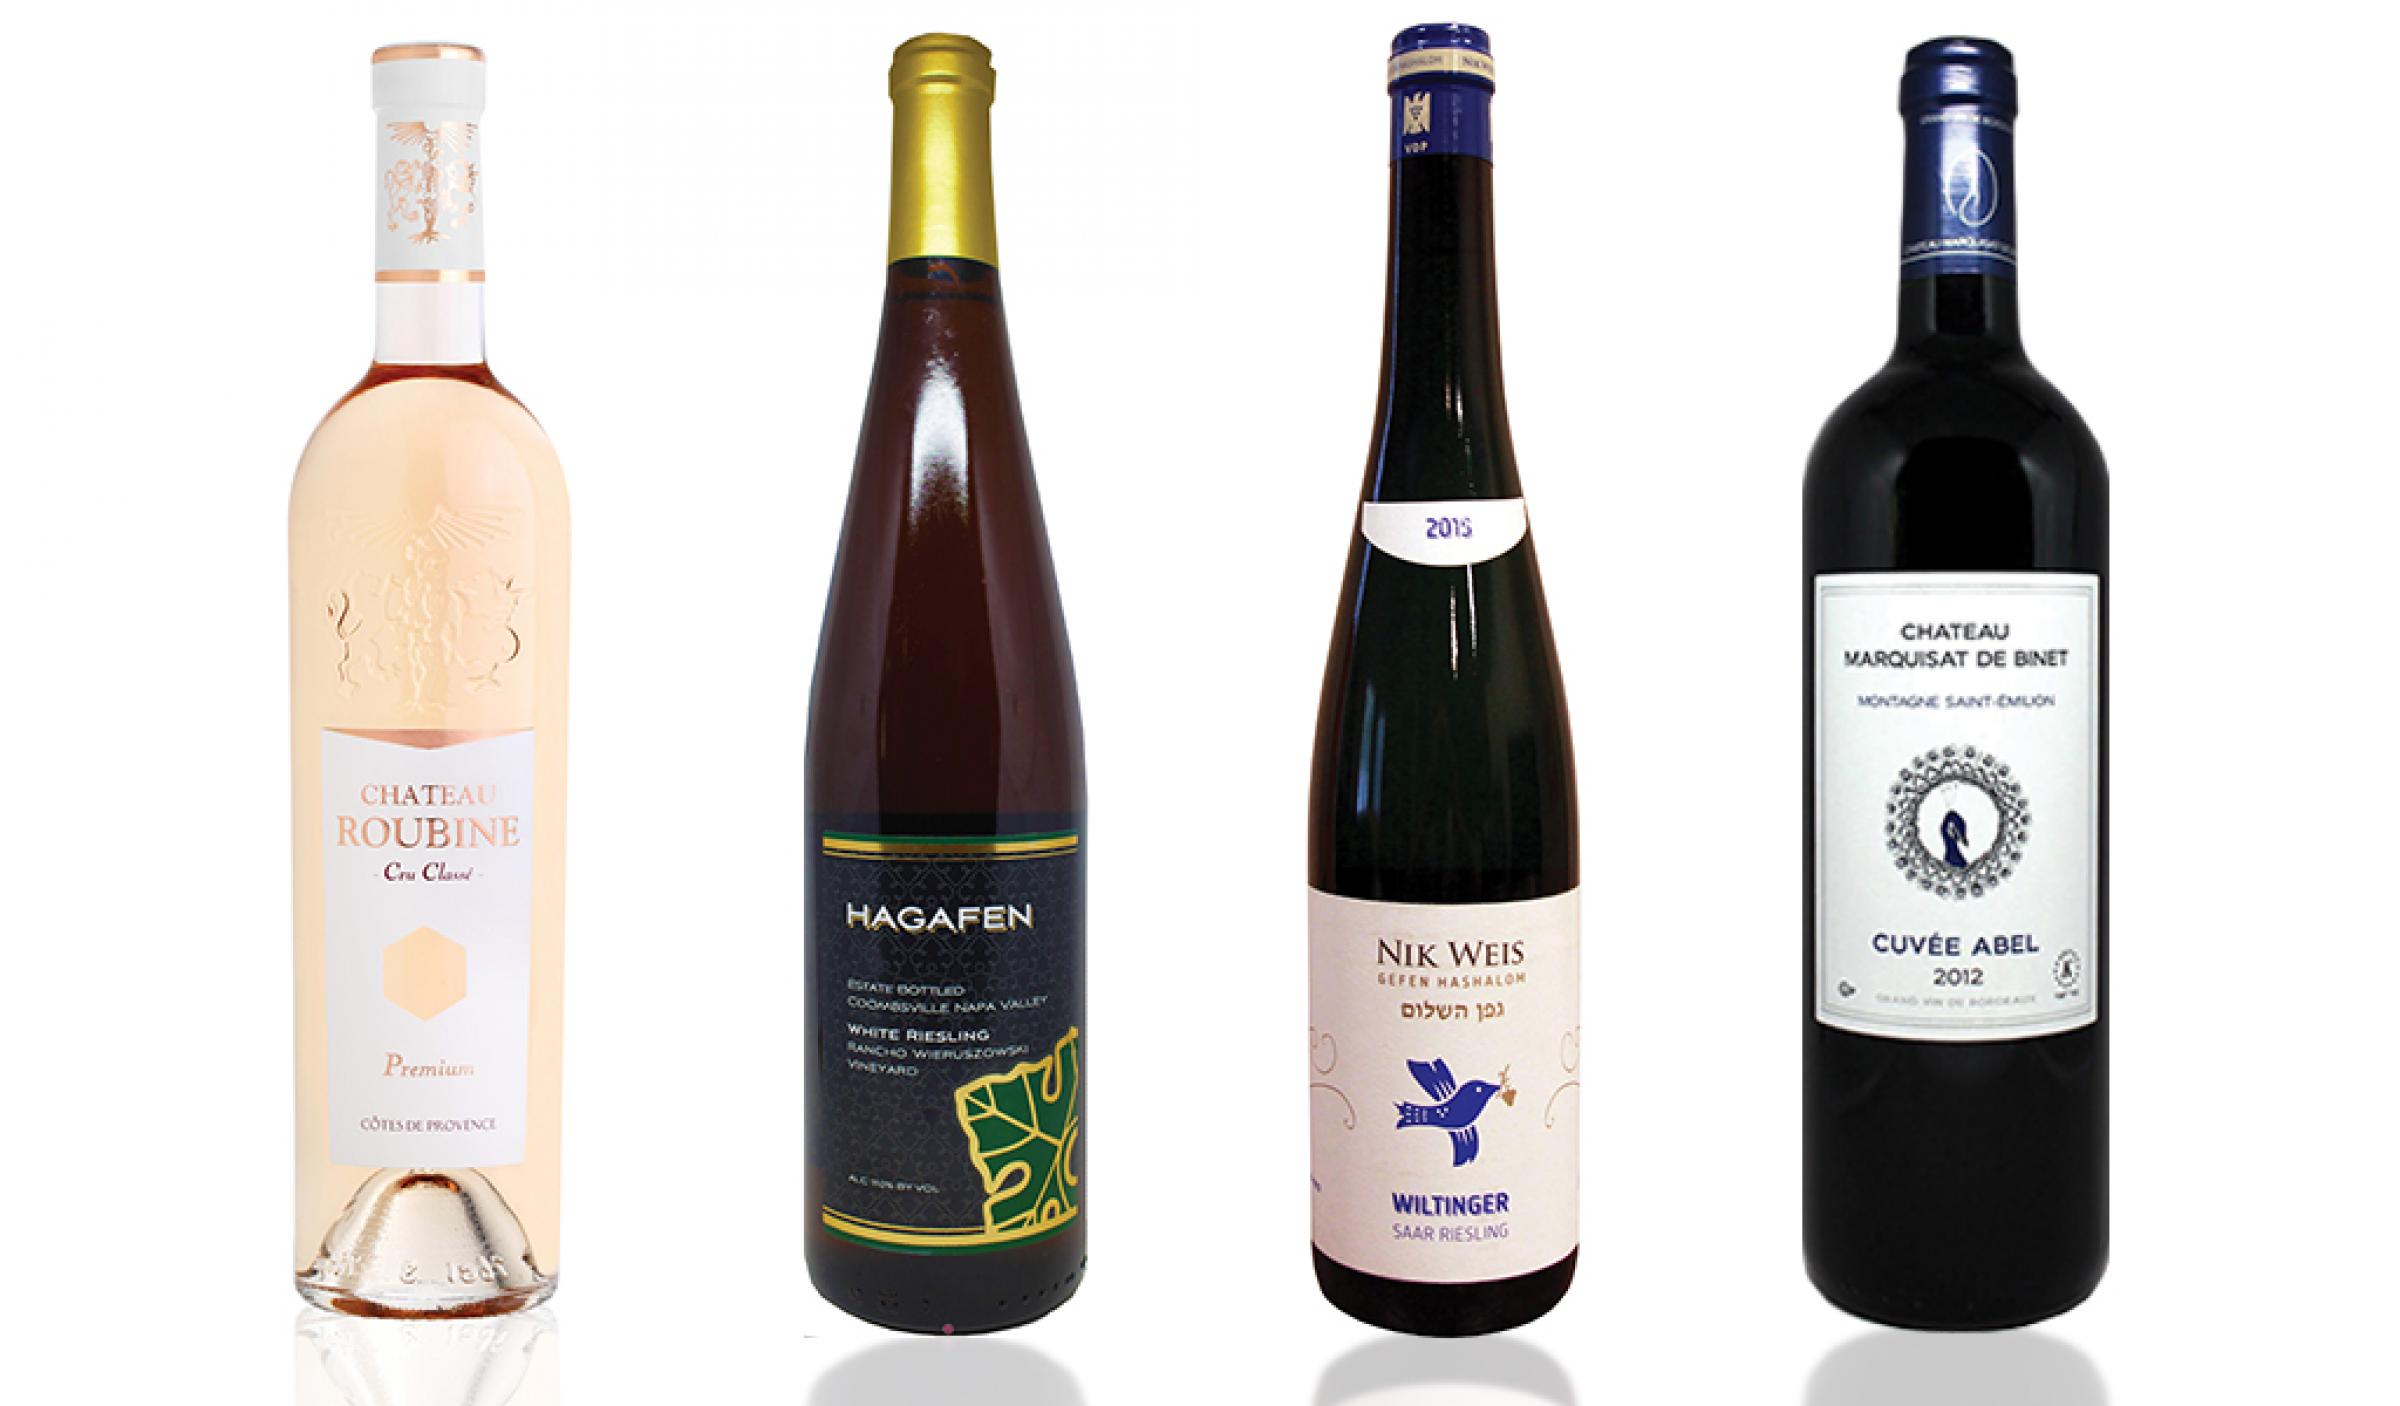  Lightening Up On The Four Cups: Wines that won't fog the mind during the long holiday ceremony 